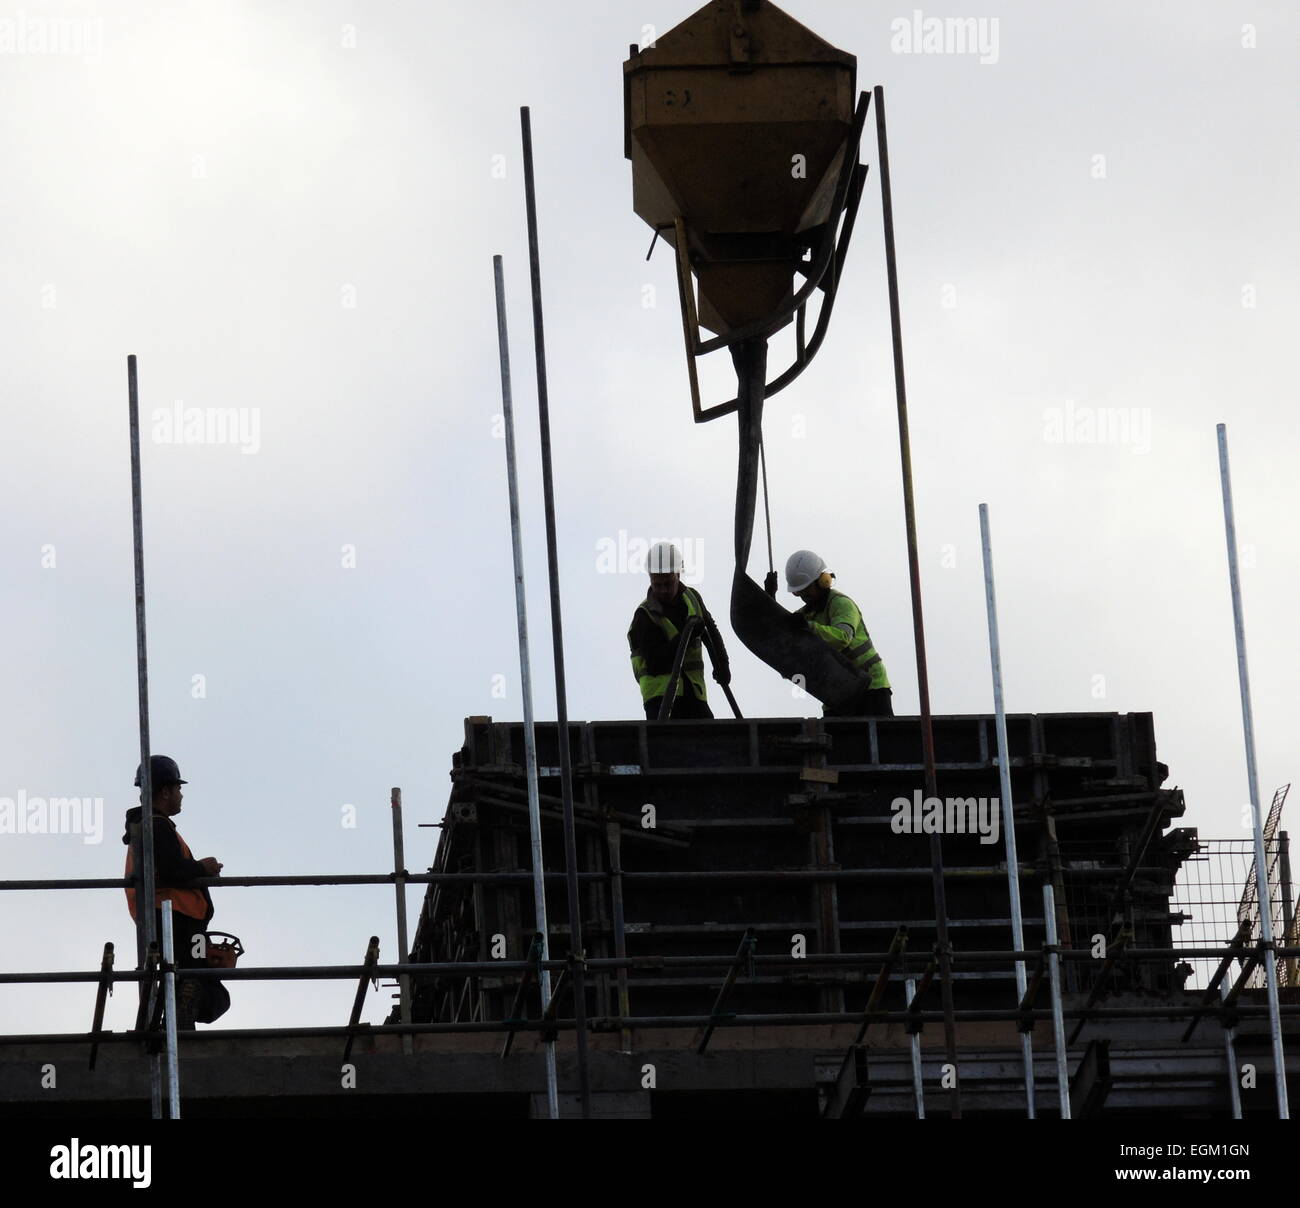 AJAXNETPHOTO. 2013. WORTHING, ENGLAND. - CONSTRUCTION SITE WORKERS ON HIGH RISE BUILDING. PHOTO:JONATHAN EASTLAND/AJAX REF:P78 132810 80 Stock Photo